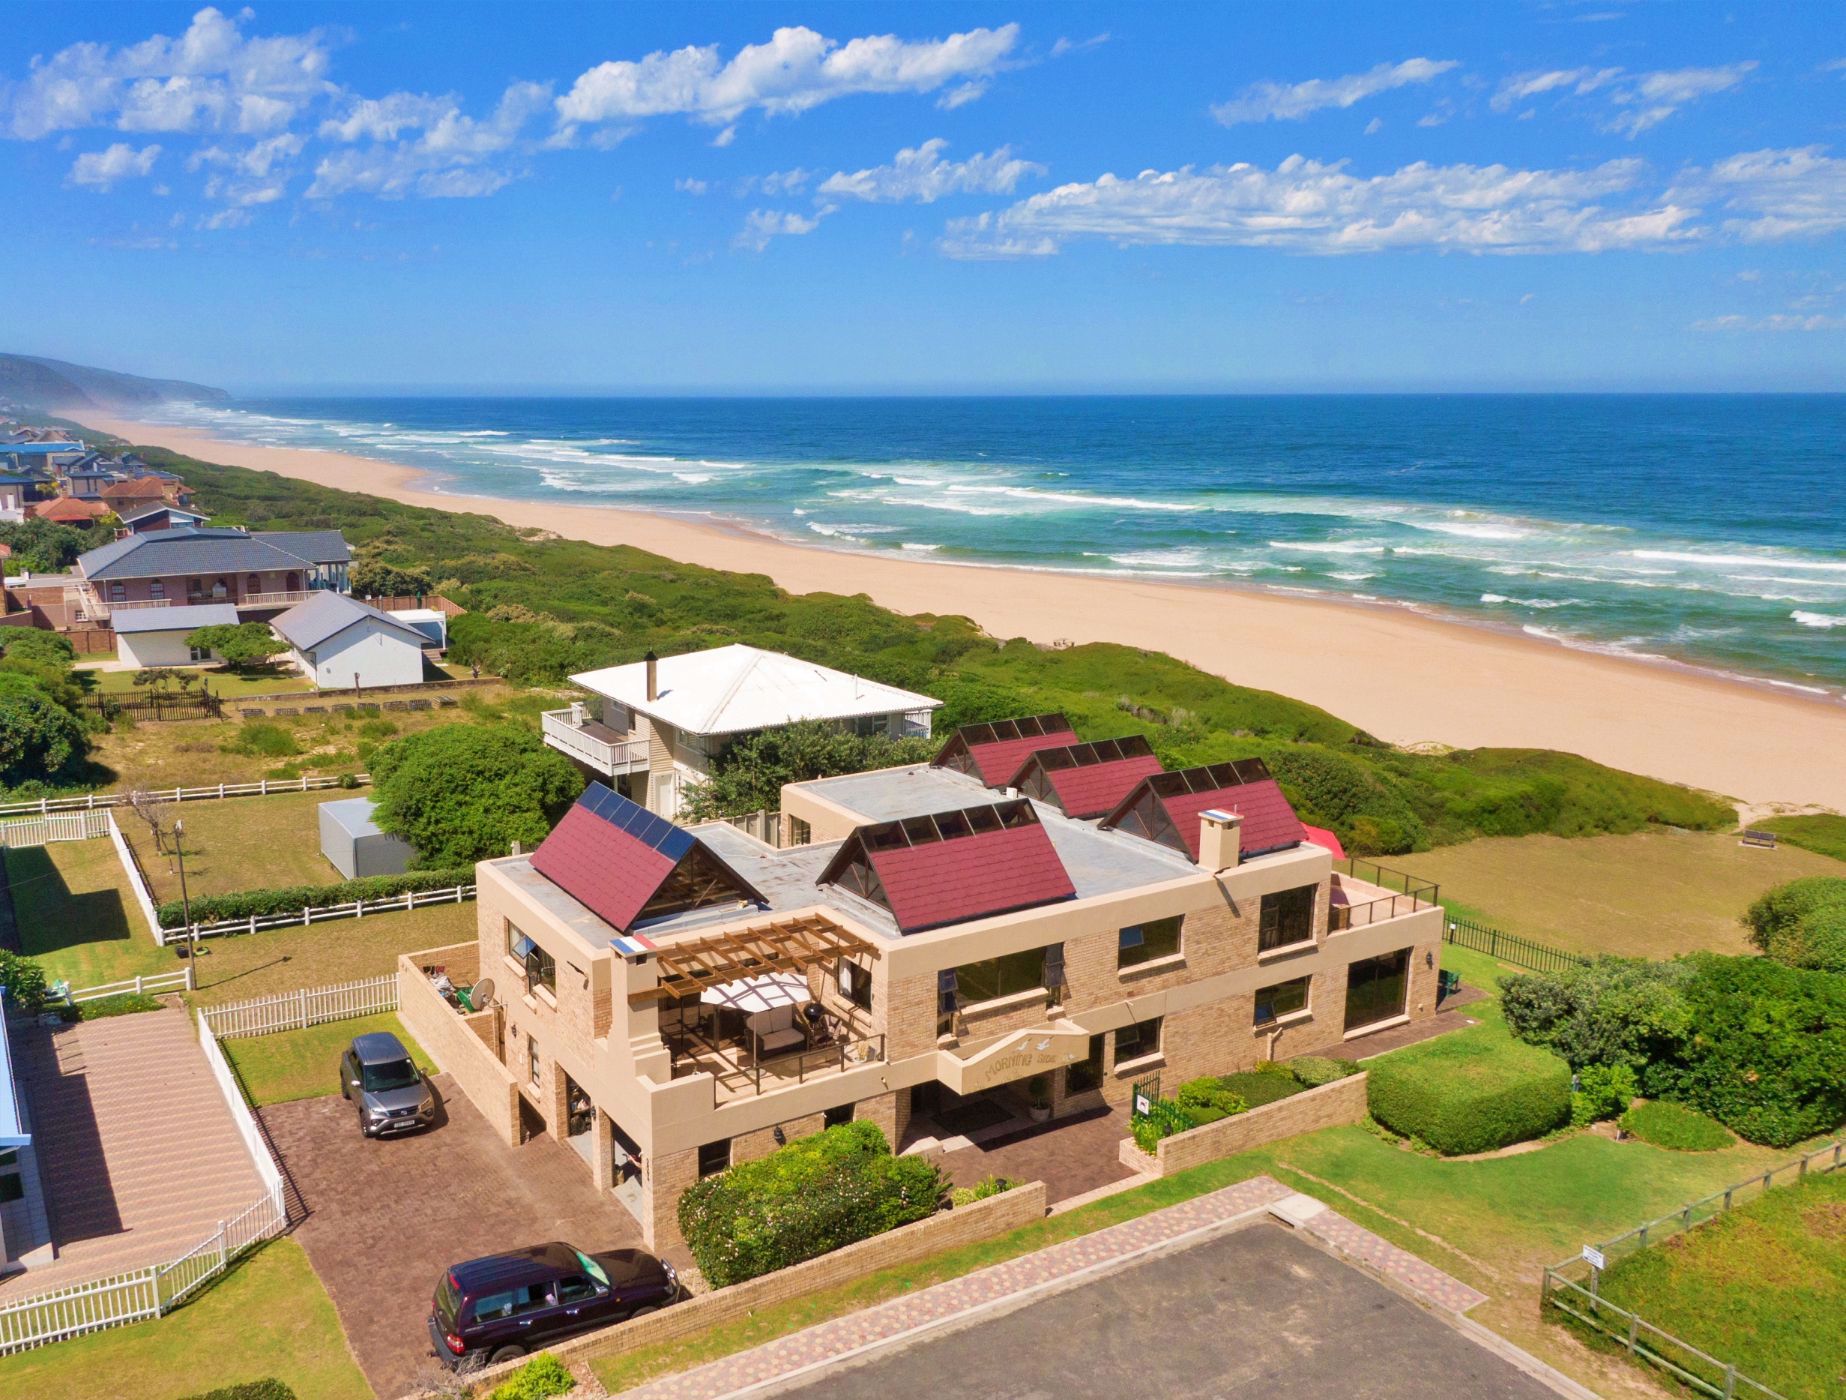 6 bedroom house for sale in Outeniqua Strand